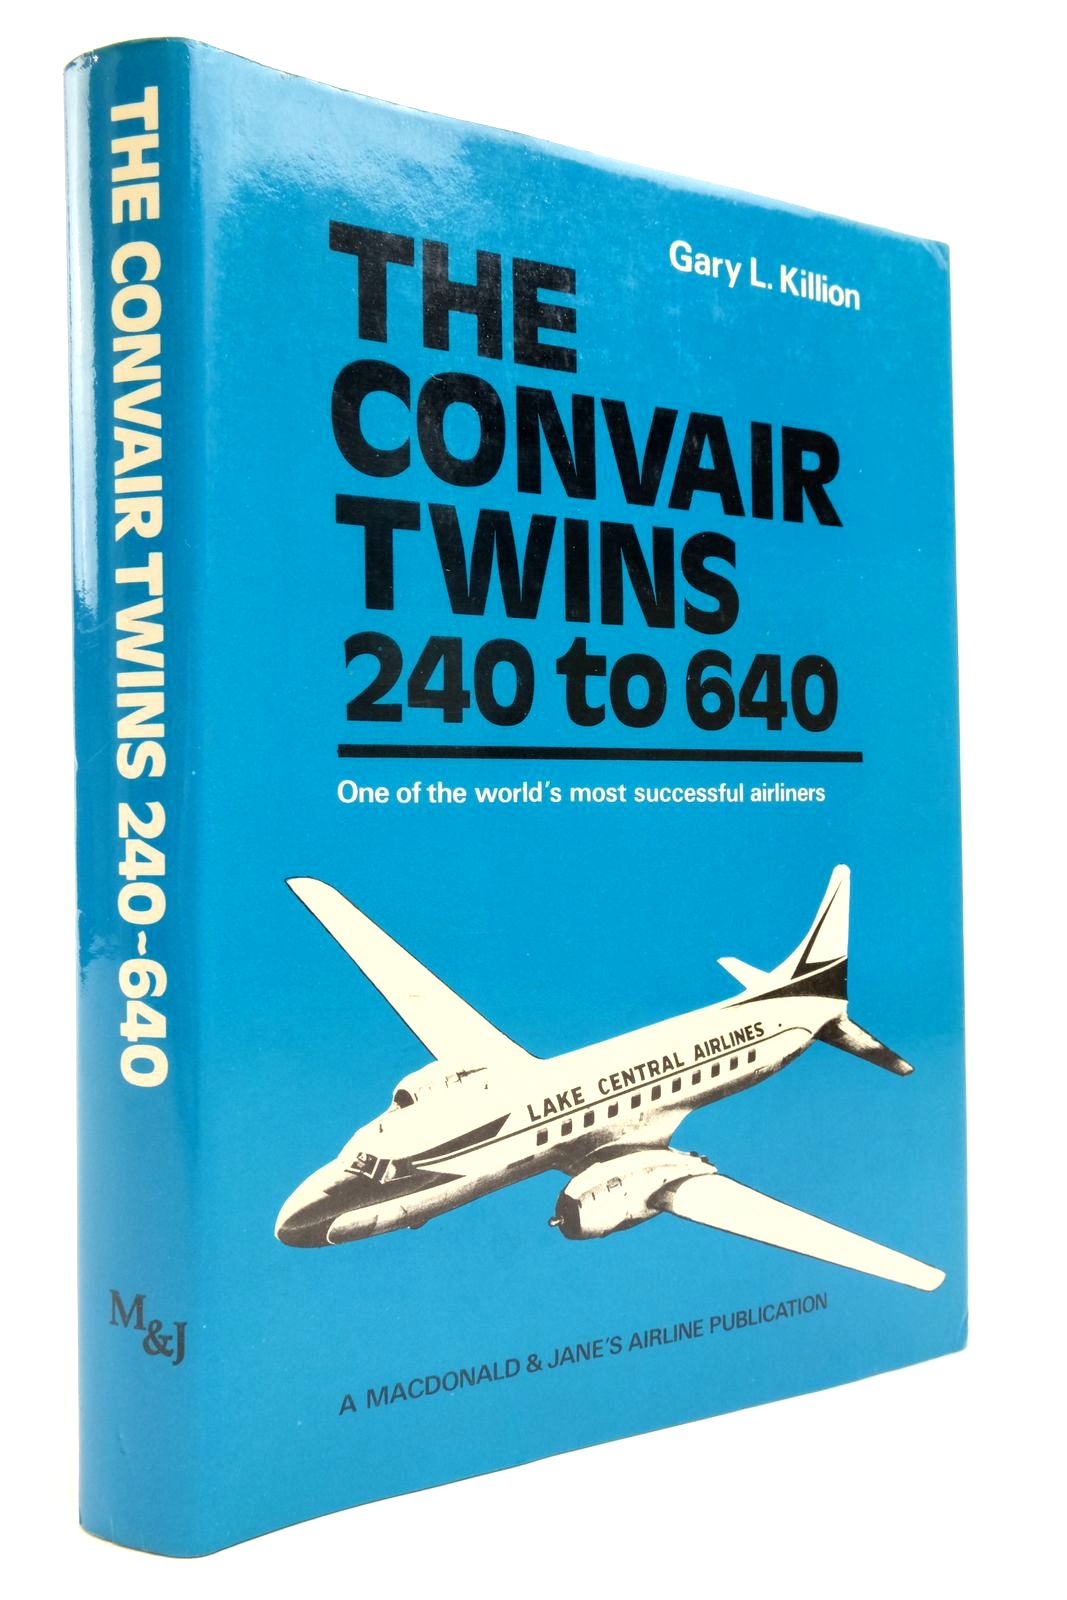 Photo of THE CONVAIR TWINS 240 TO 640 written by Killion, Gary L. published by Macdonald and Jane's (STOCK CODE: 2138494)  for sale by Stella & Rose's Books